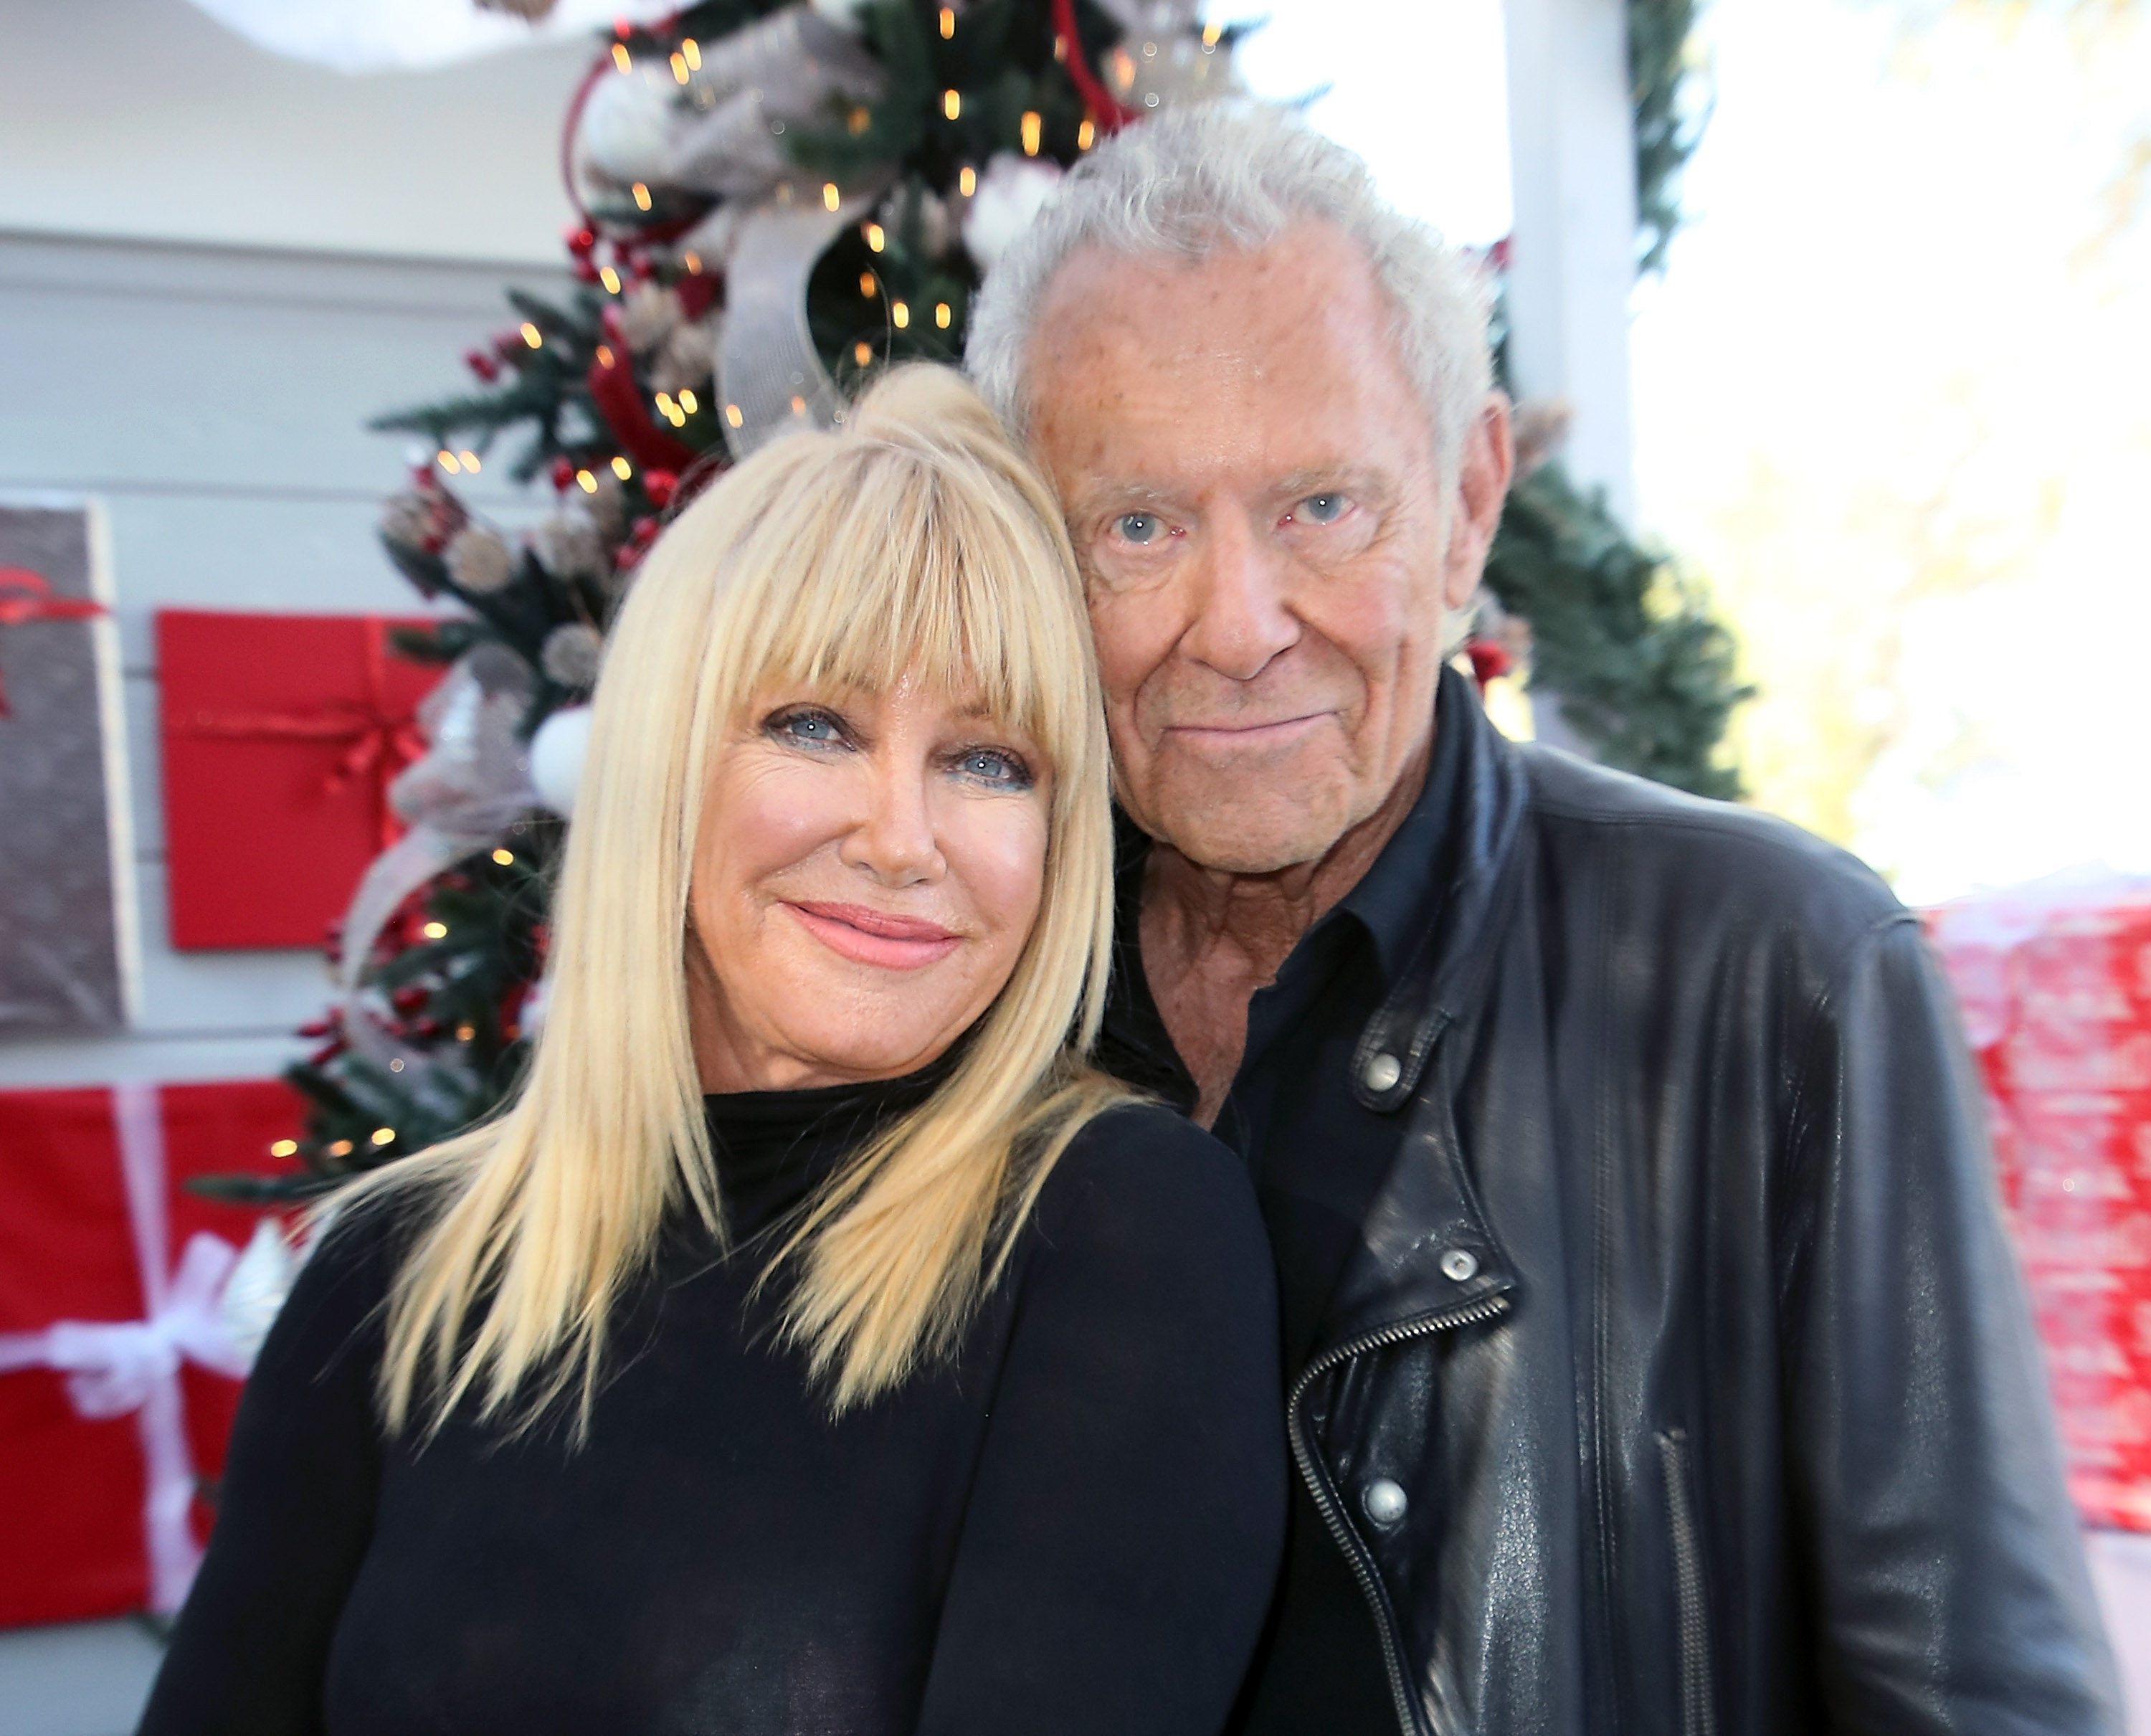 Suzanne Somers and Alan Hamel visit Hallmark's "Home & Family" on December 15, 2017 in Universal City, California | Source: Getty Images